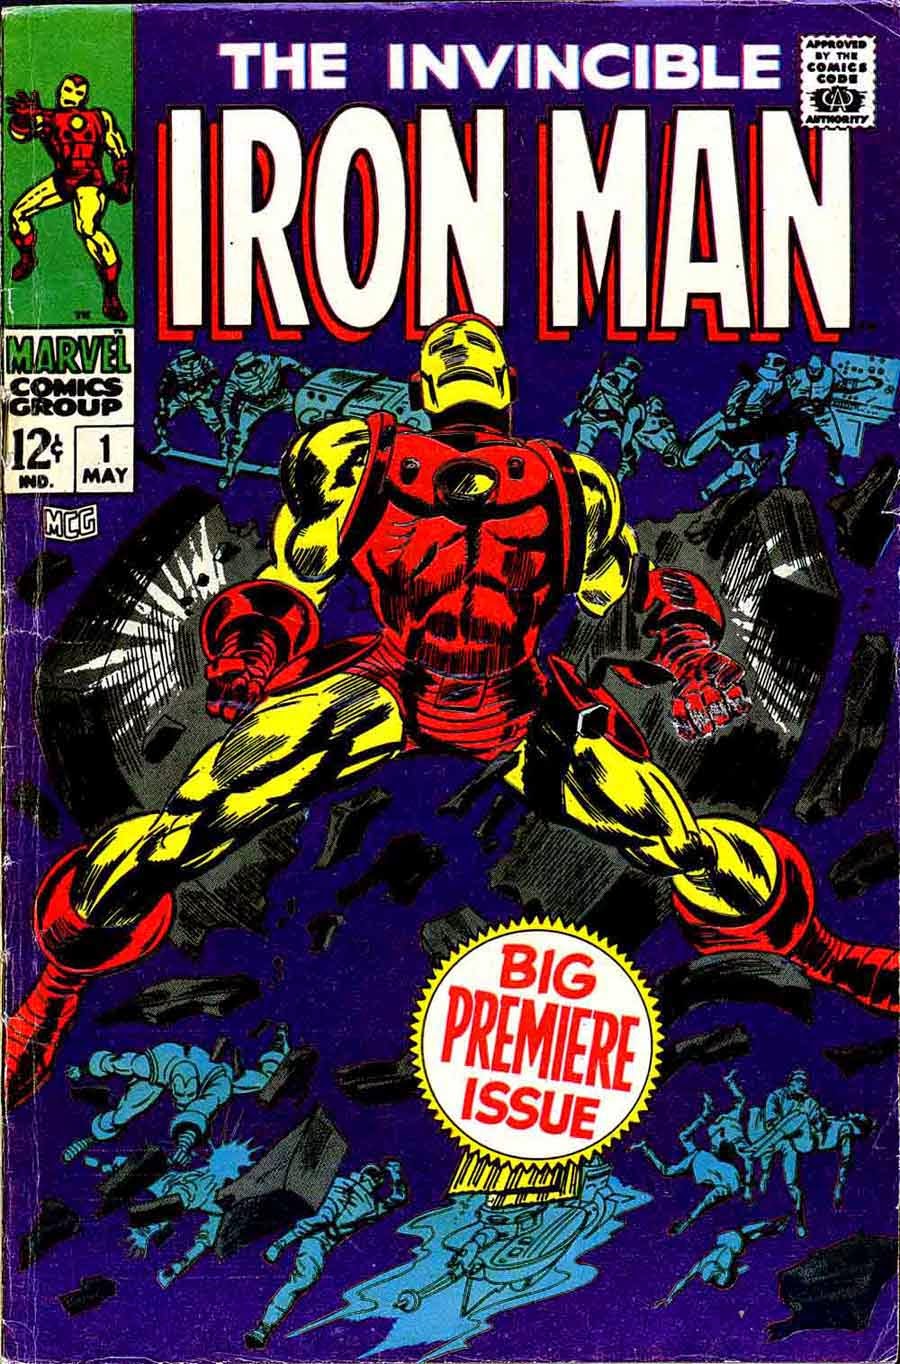 Iron Man v1 #1, 1968 marvel silver age comic book cover